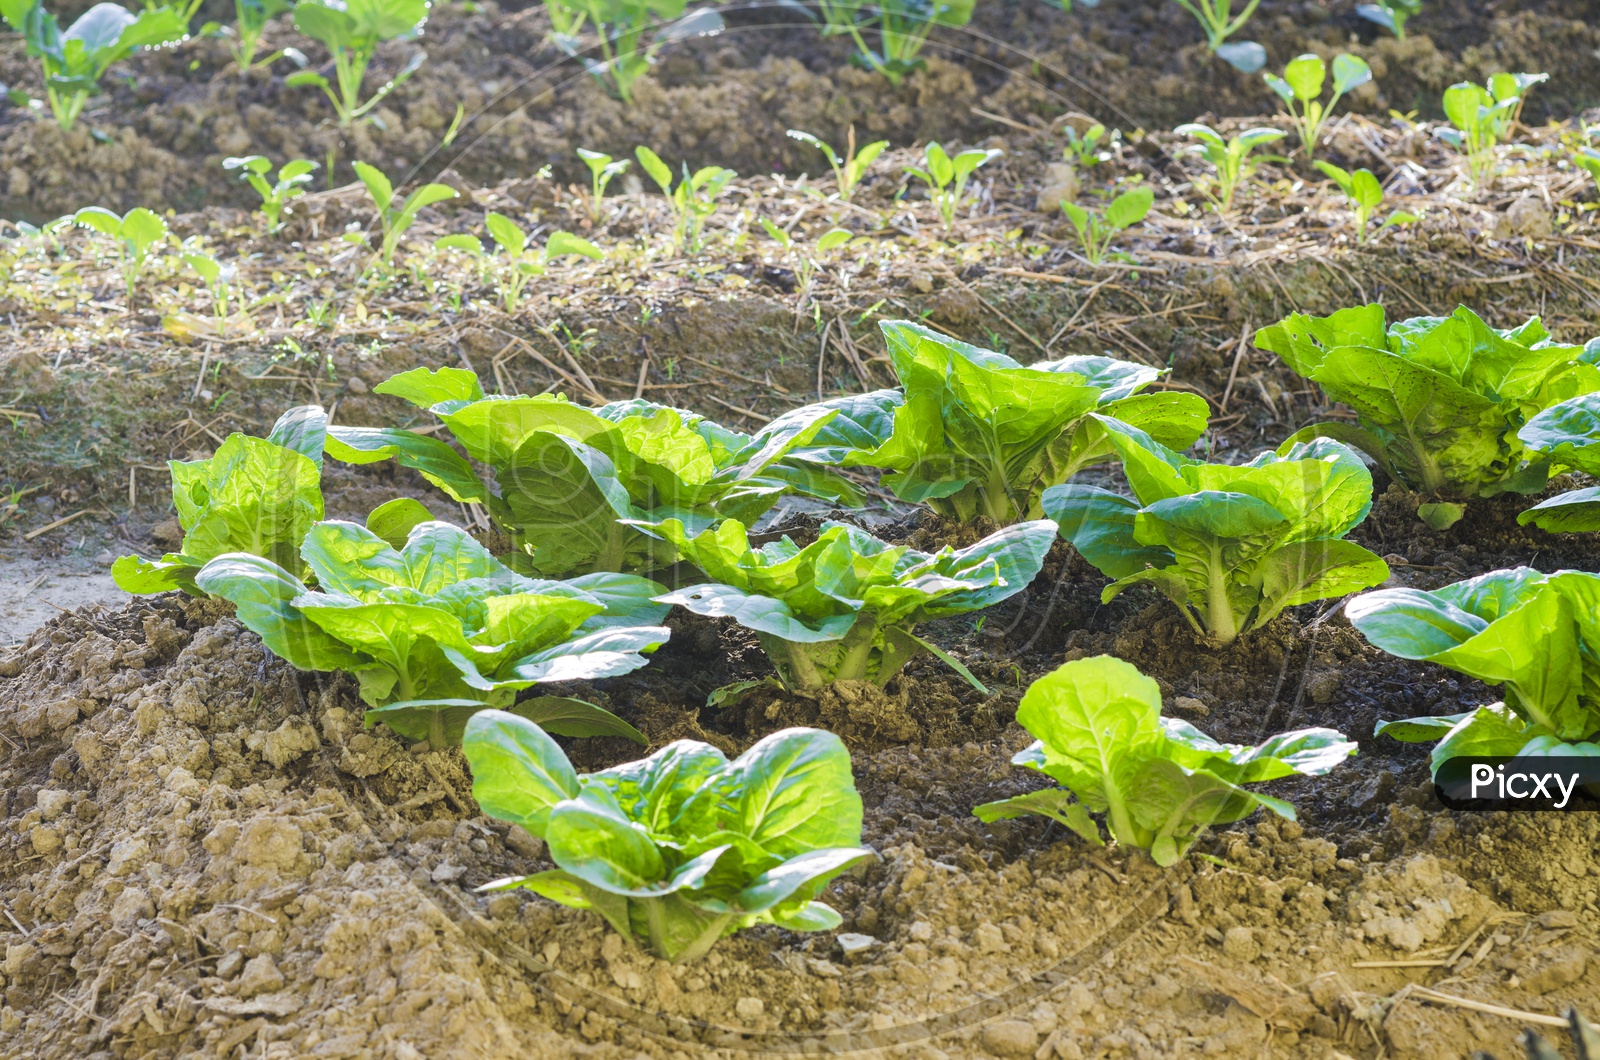 vegetable farm With Green Plants Growing in soil